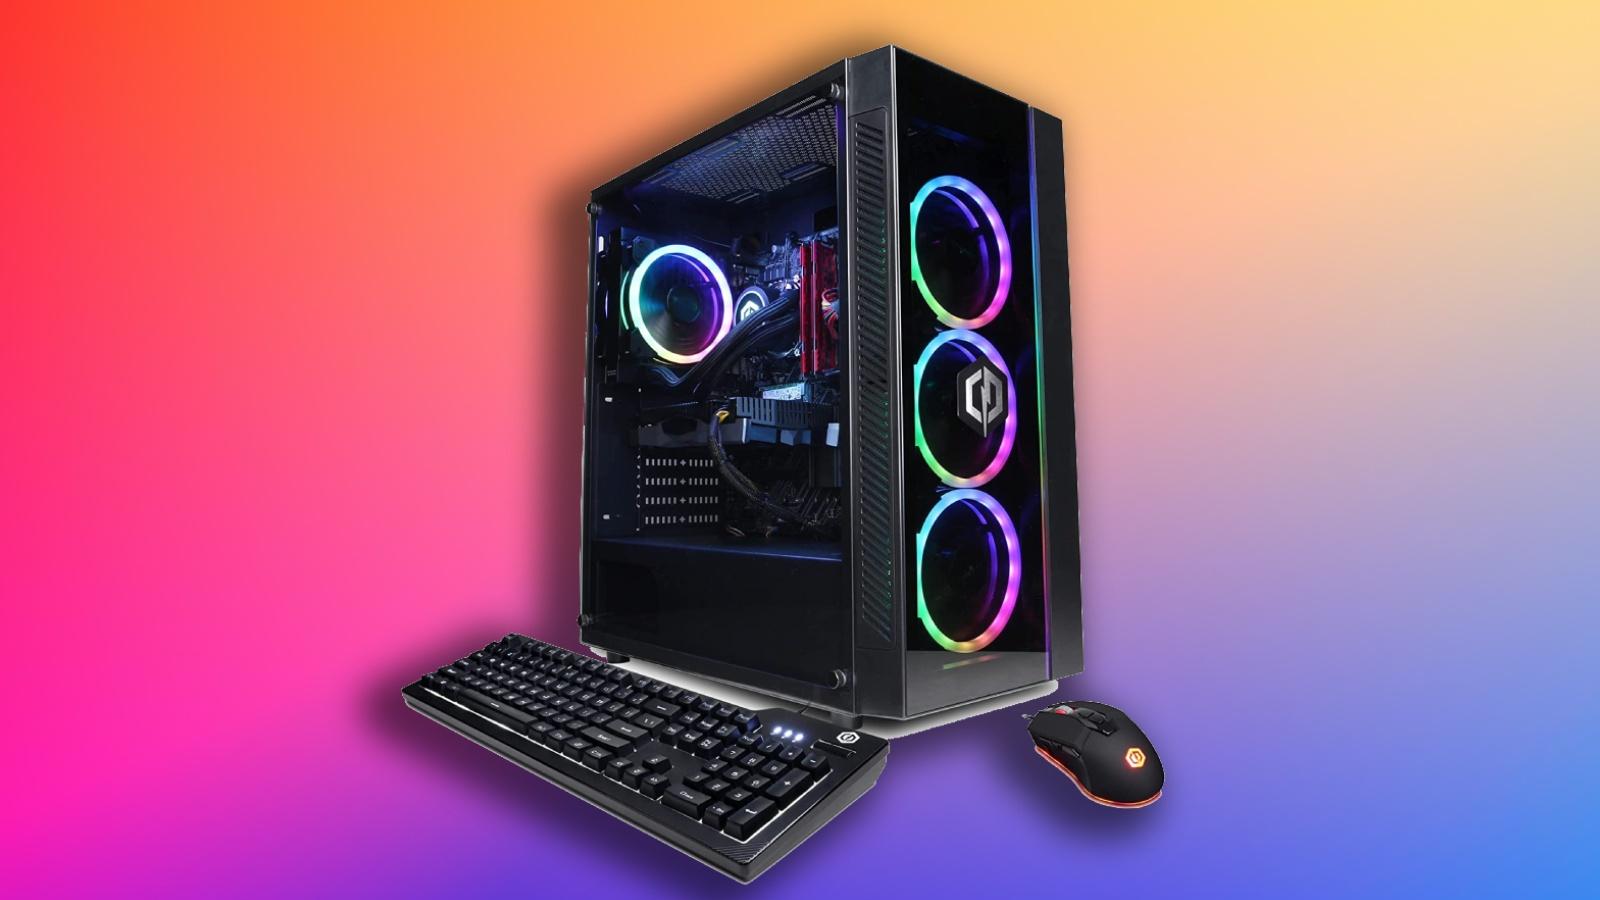 Save 400 on this gaming PC Black Friday deal with an RTX 3060 & Ryzen